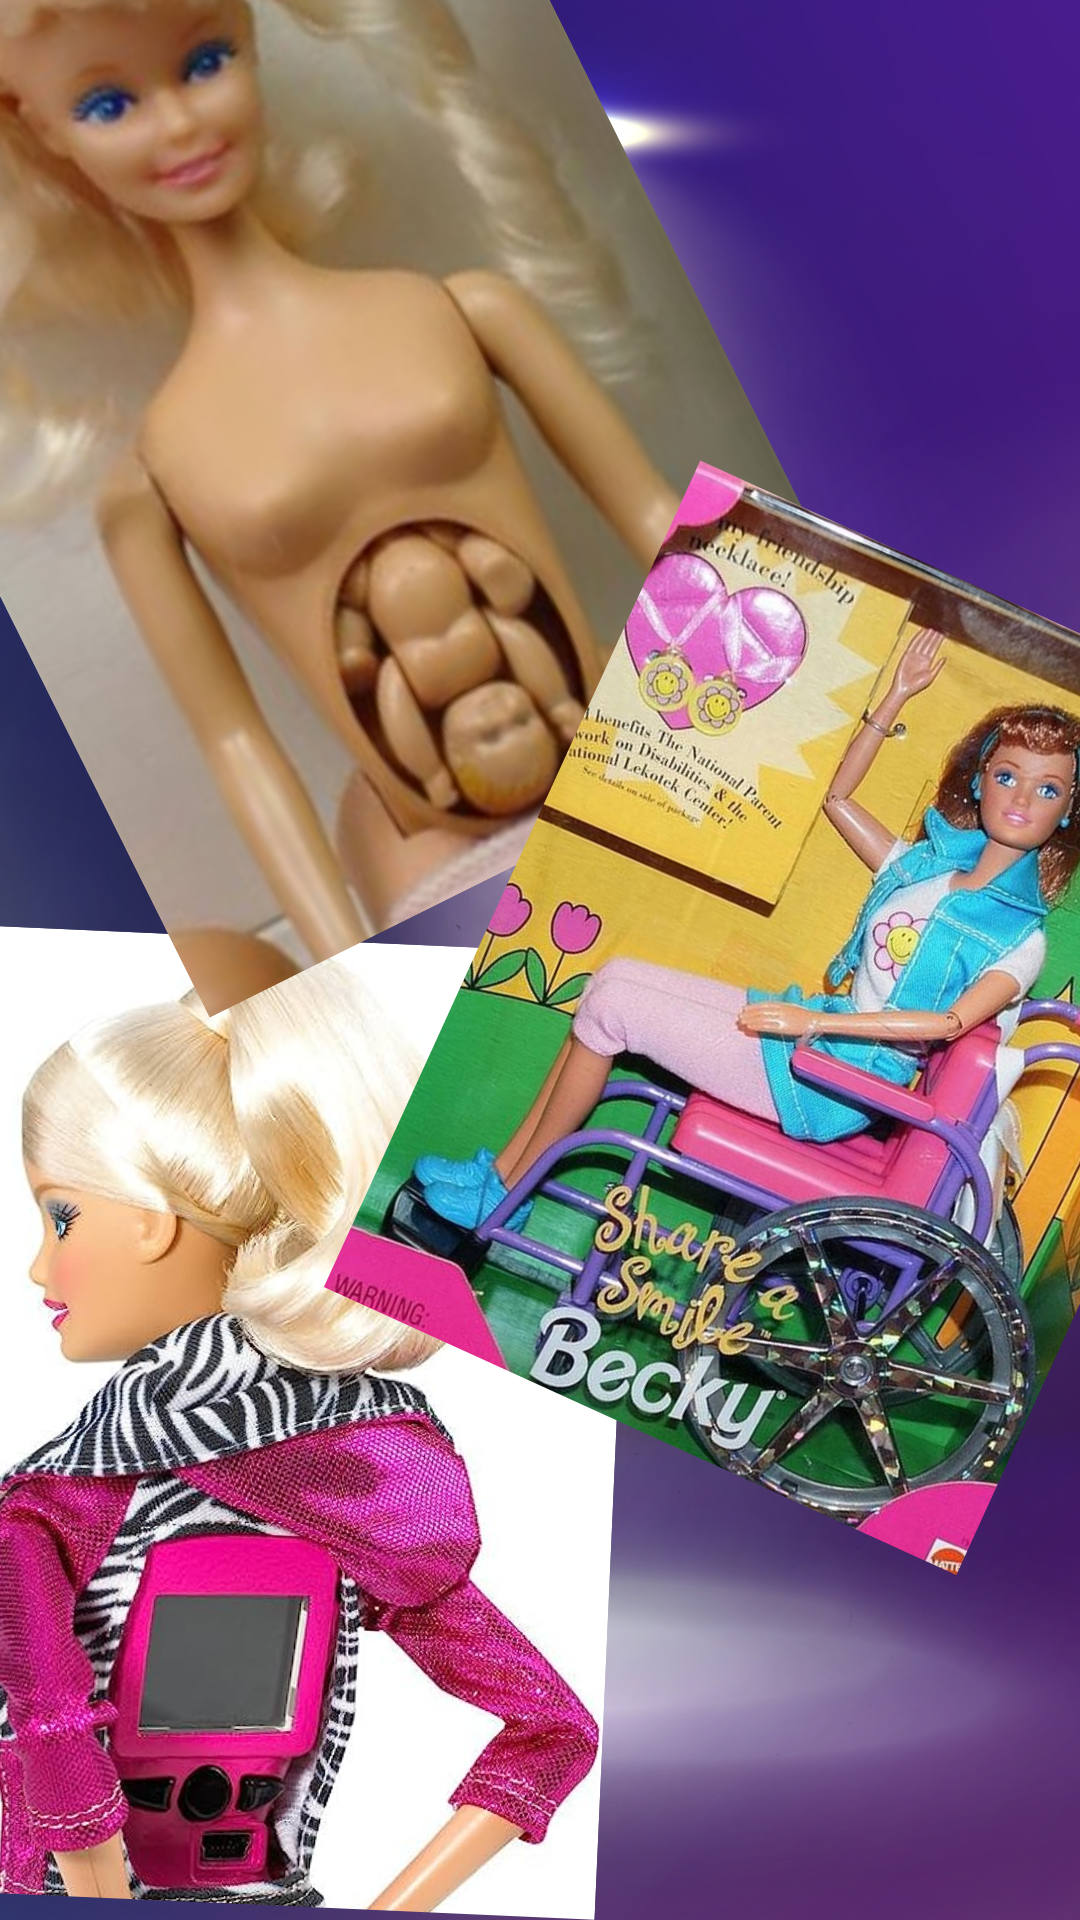 PHOTOS: How Barbie Became the Most Popular Doll in the World